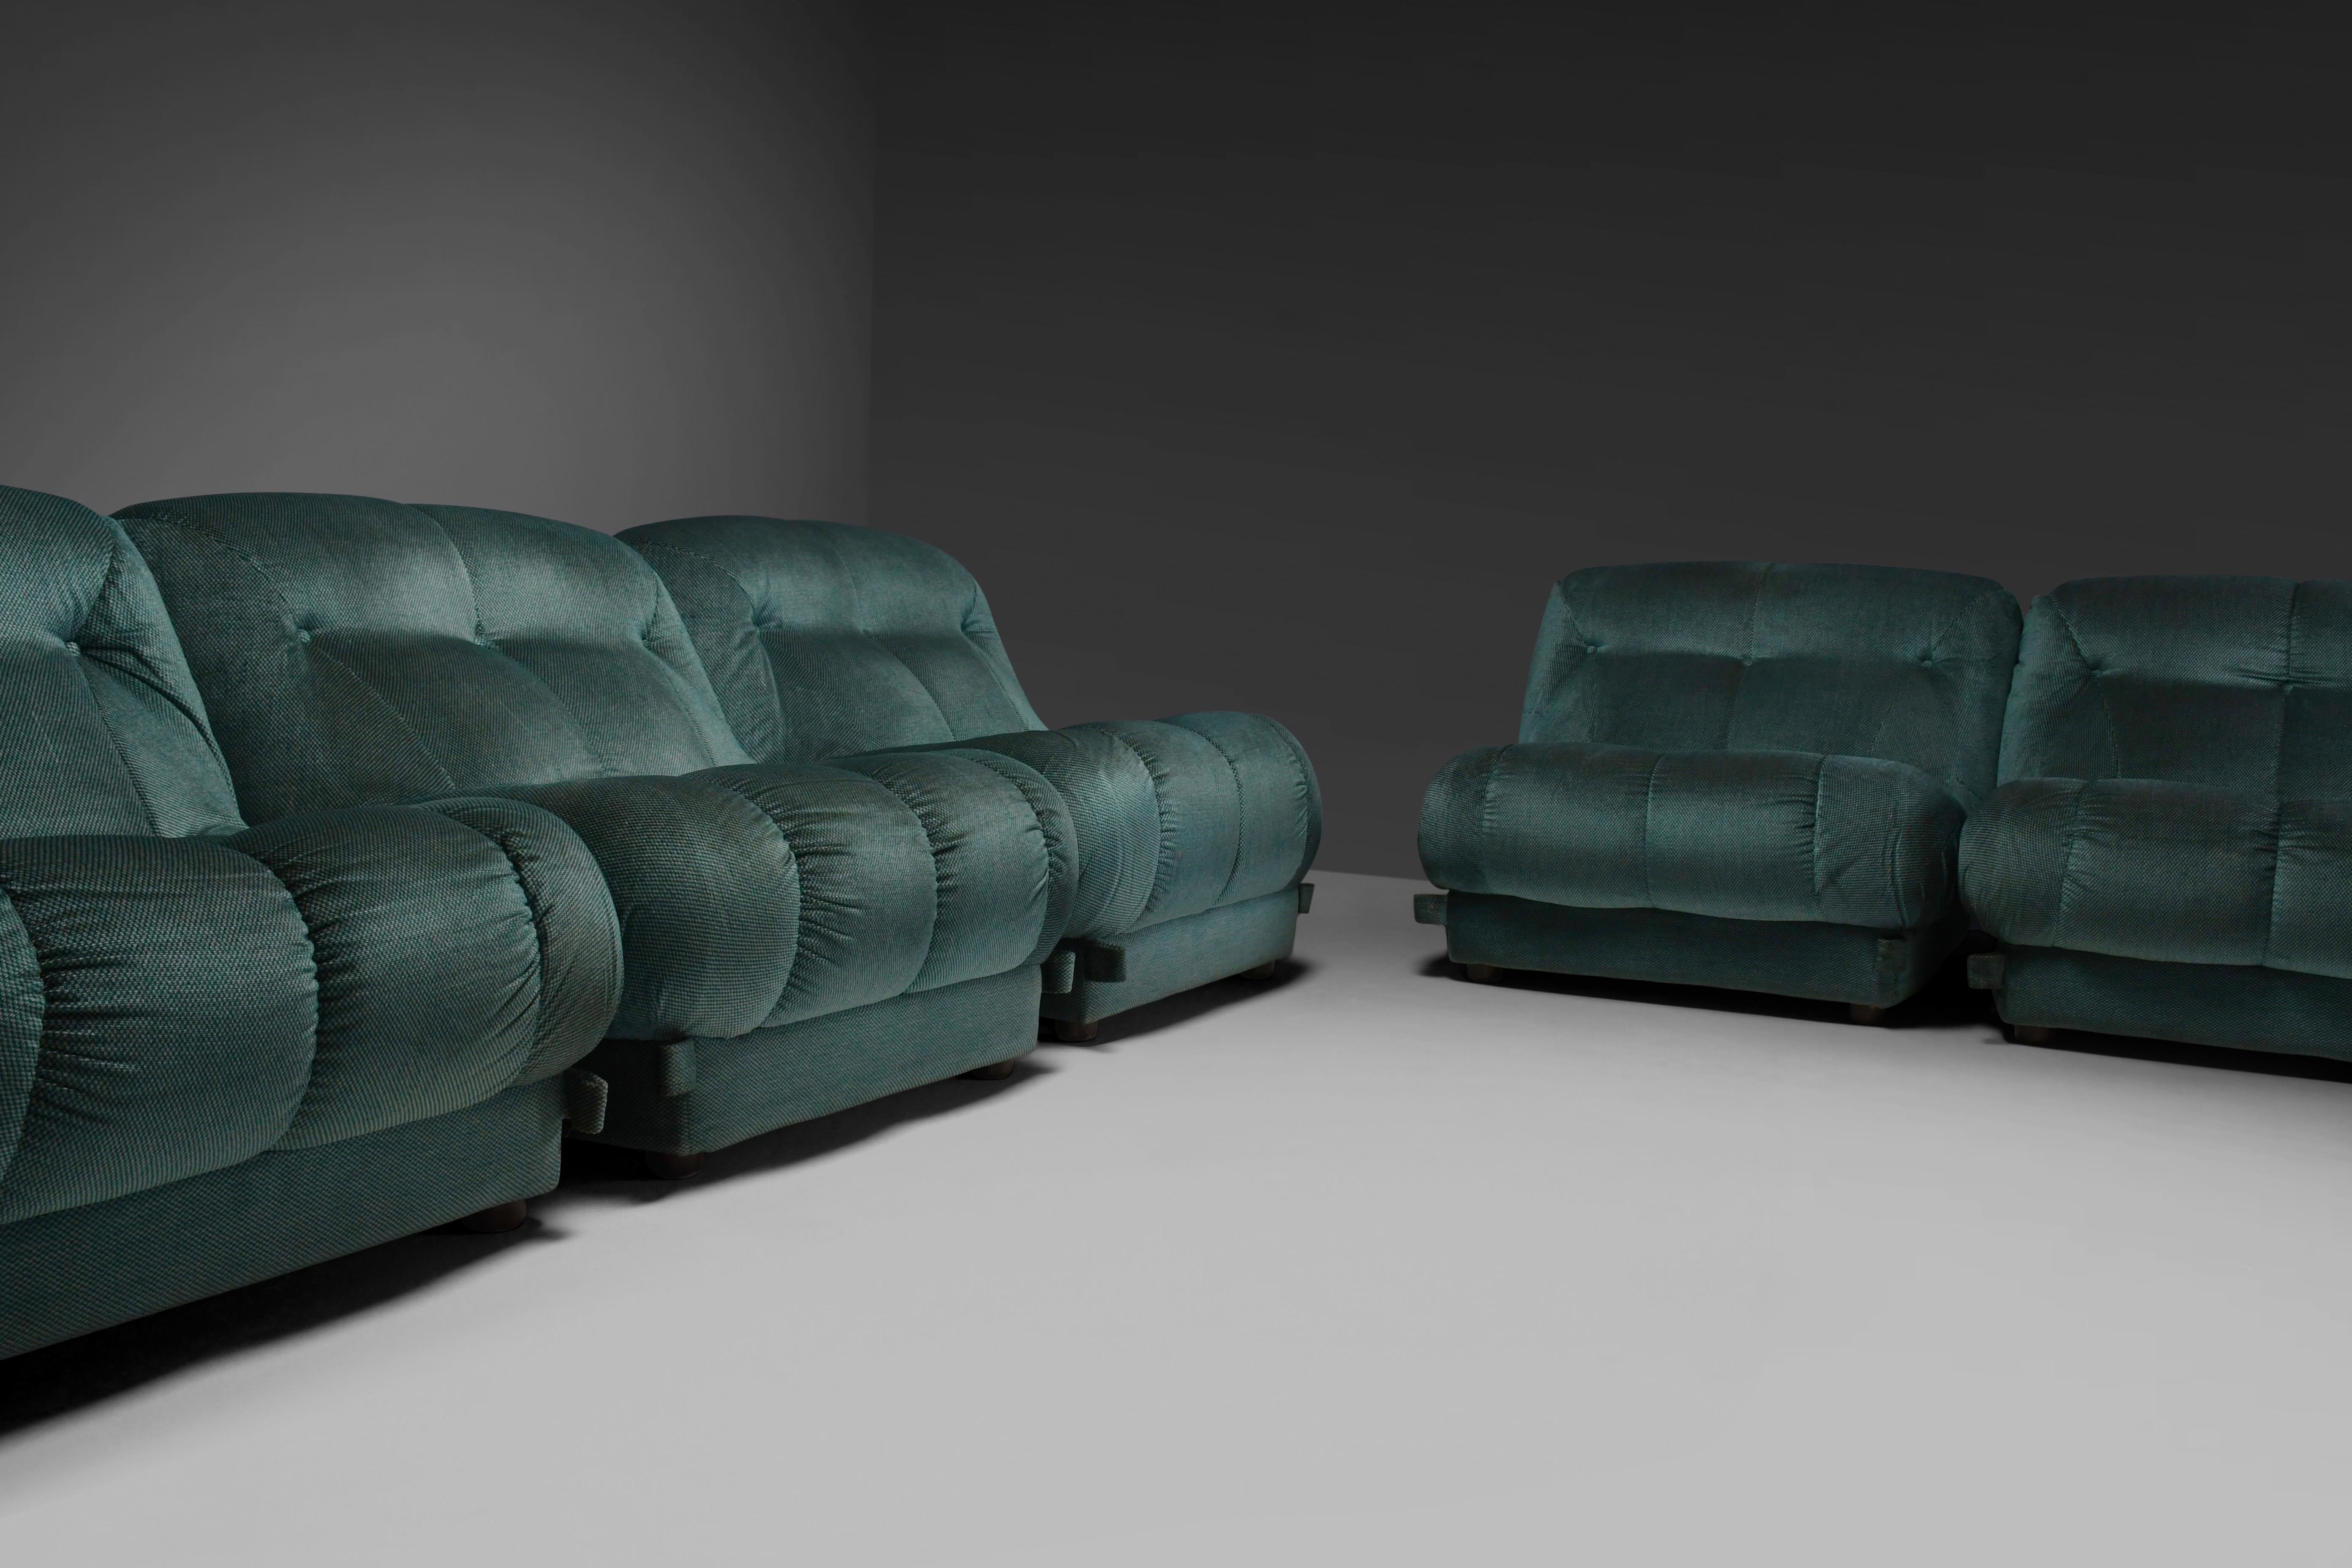 Large Modular Sectional ‘Nuvolone’ Sofa by Rino Maturi in Green Fabric, 1970s For Sale 3